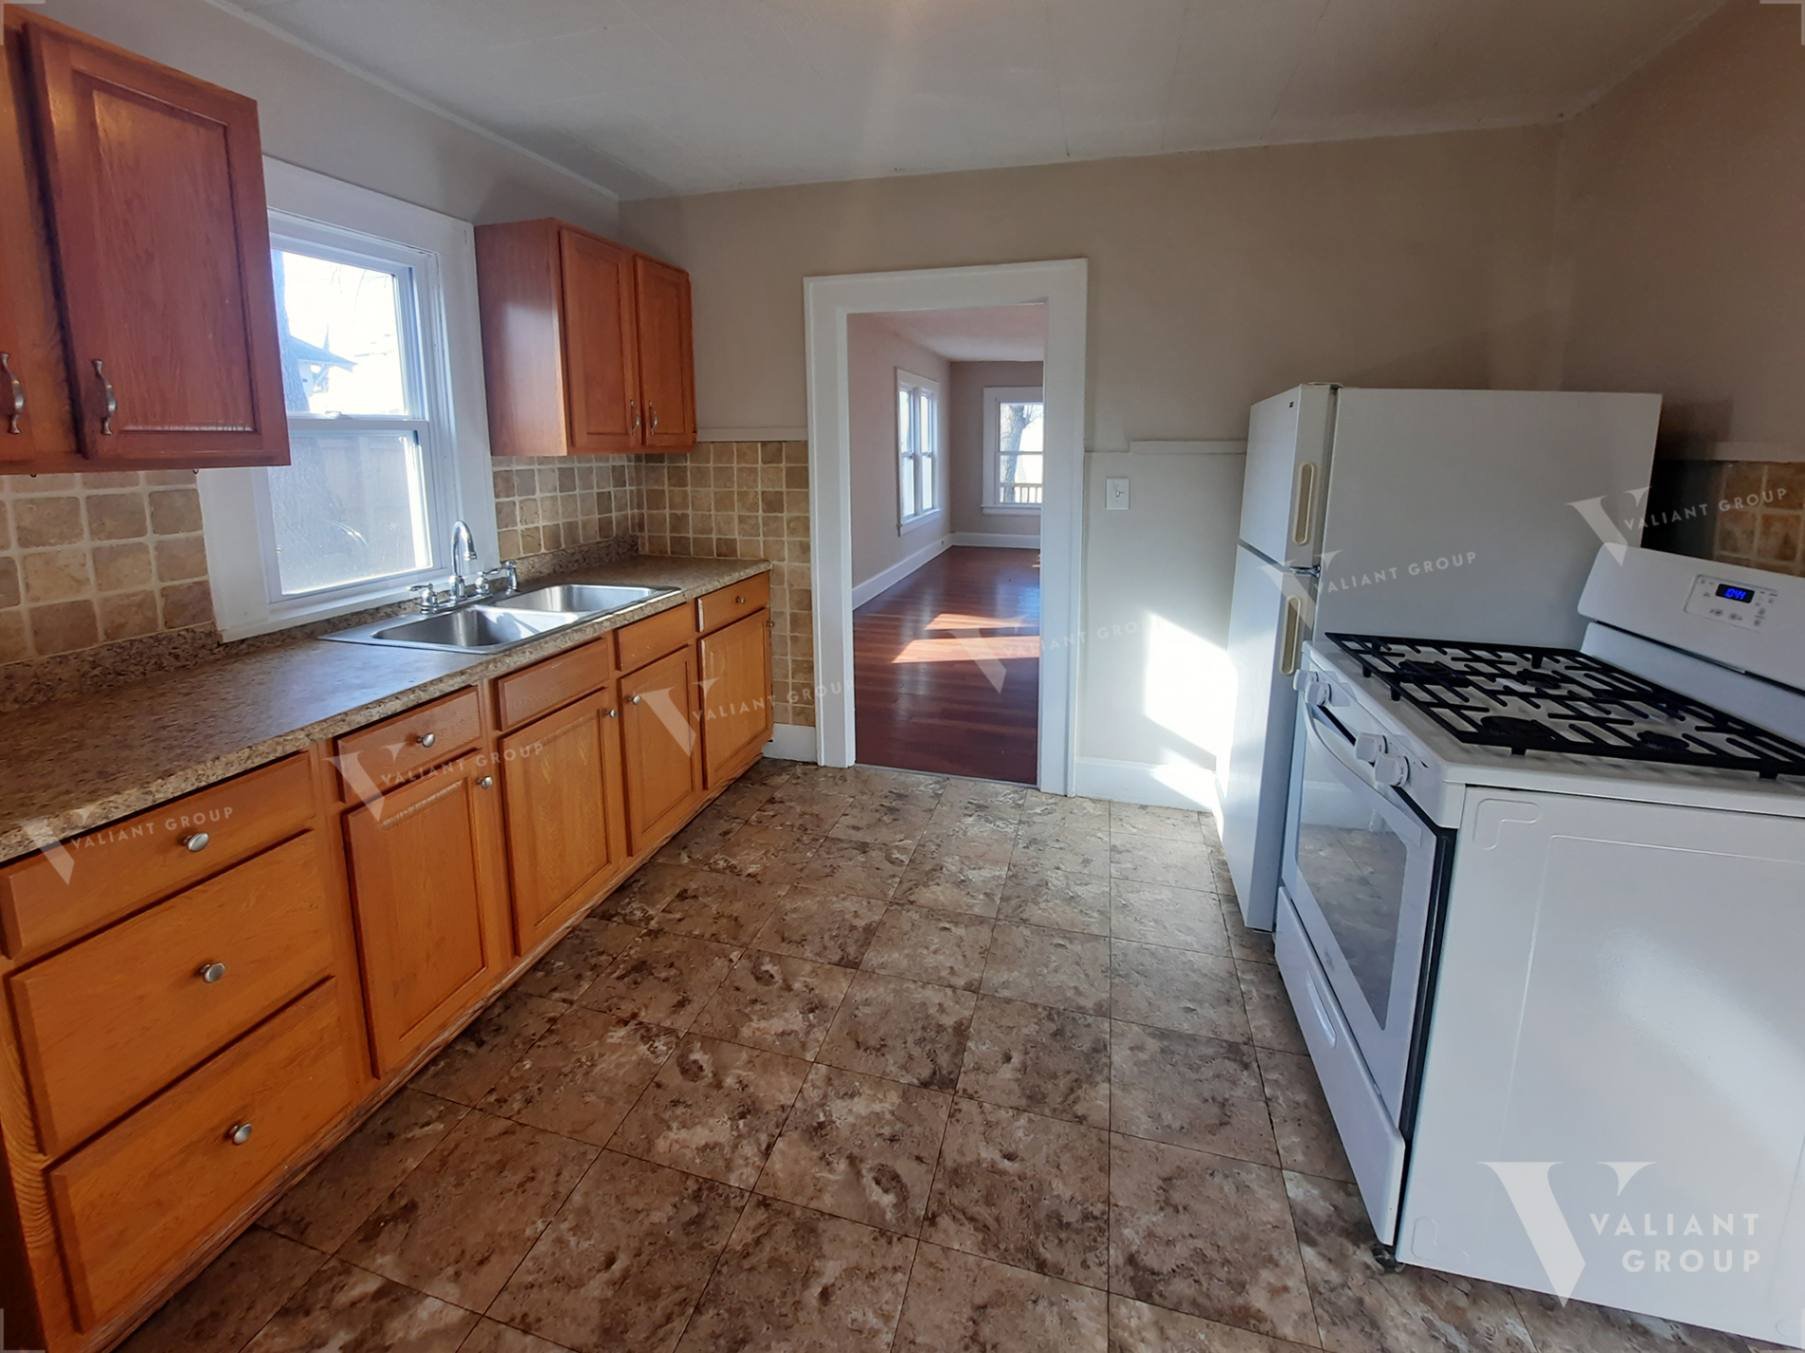 House-For-Rent-1012-S-Fort-Ave-Springfield-MO-05-Kitchen.jpg